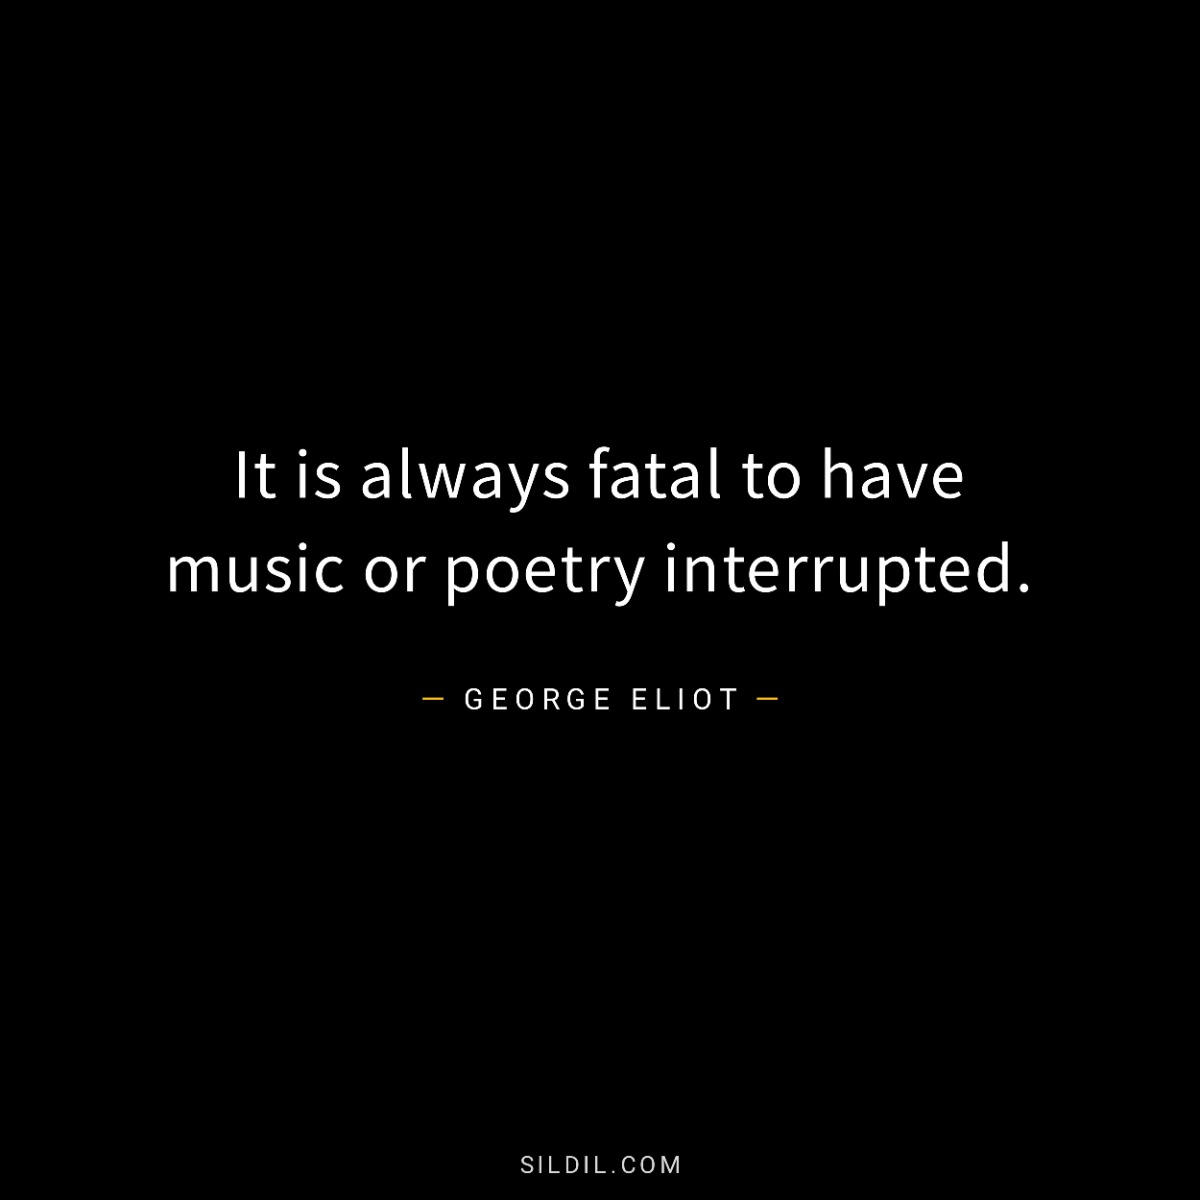 It is always fatal to have music or poetry interrupted.